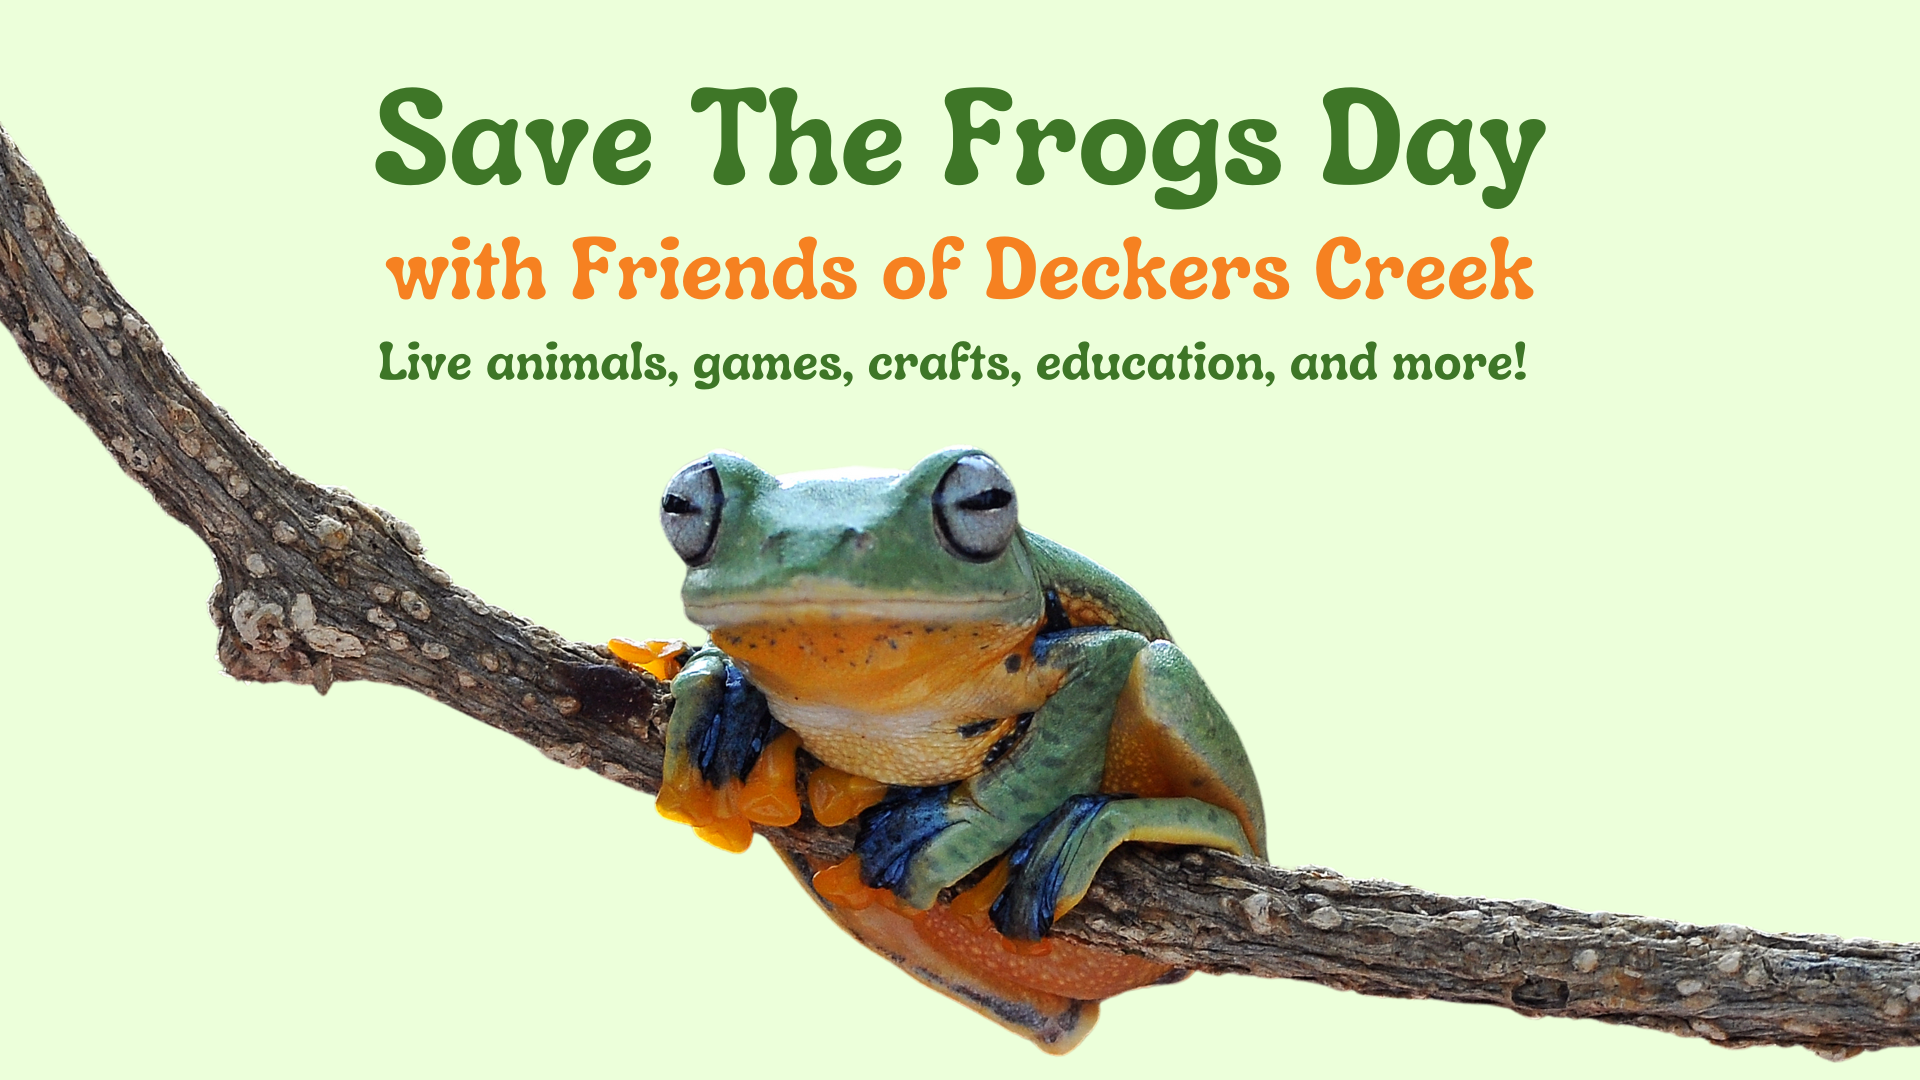 Save The Frogs Day 2024